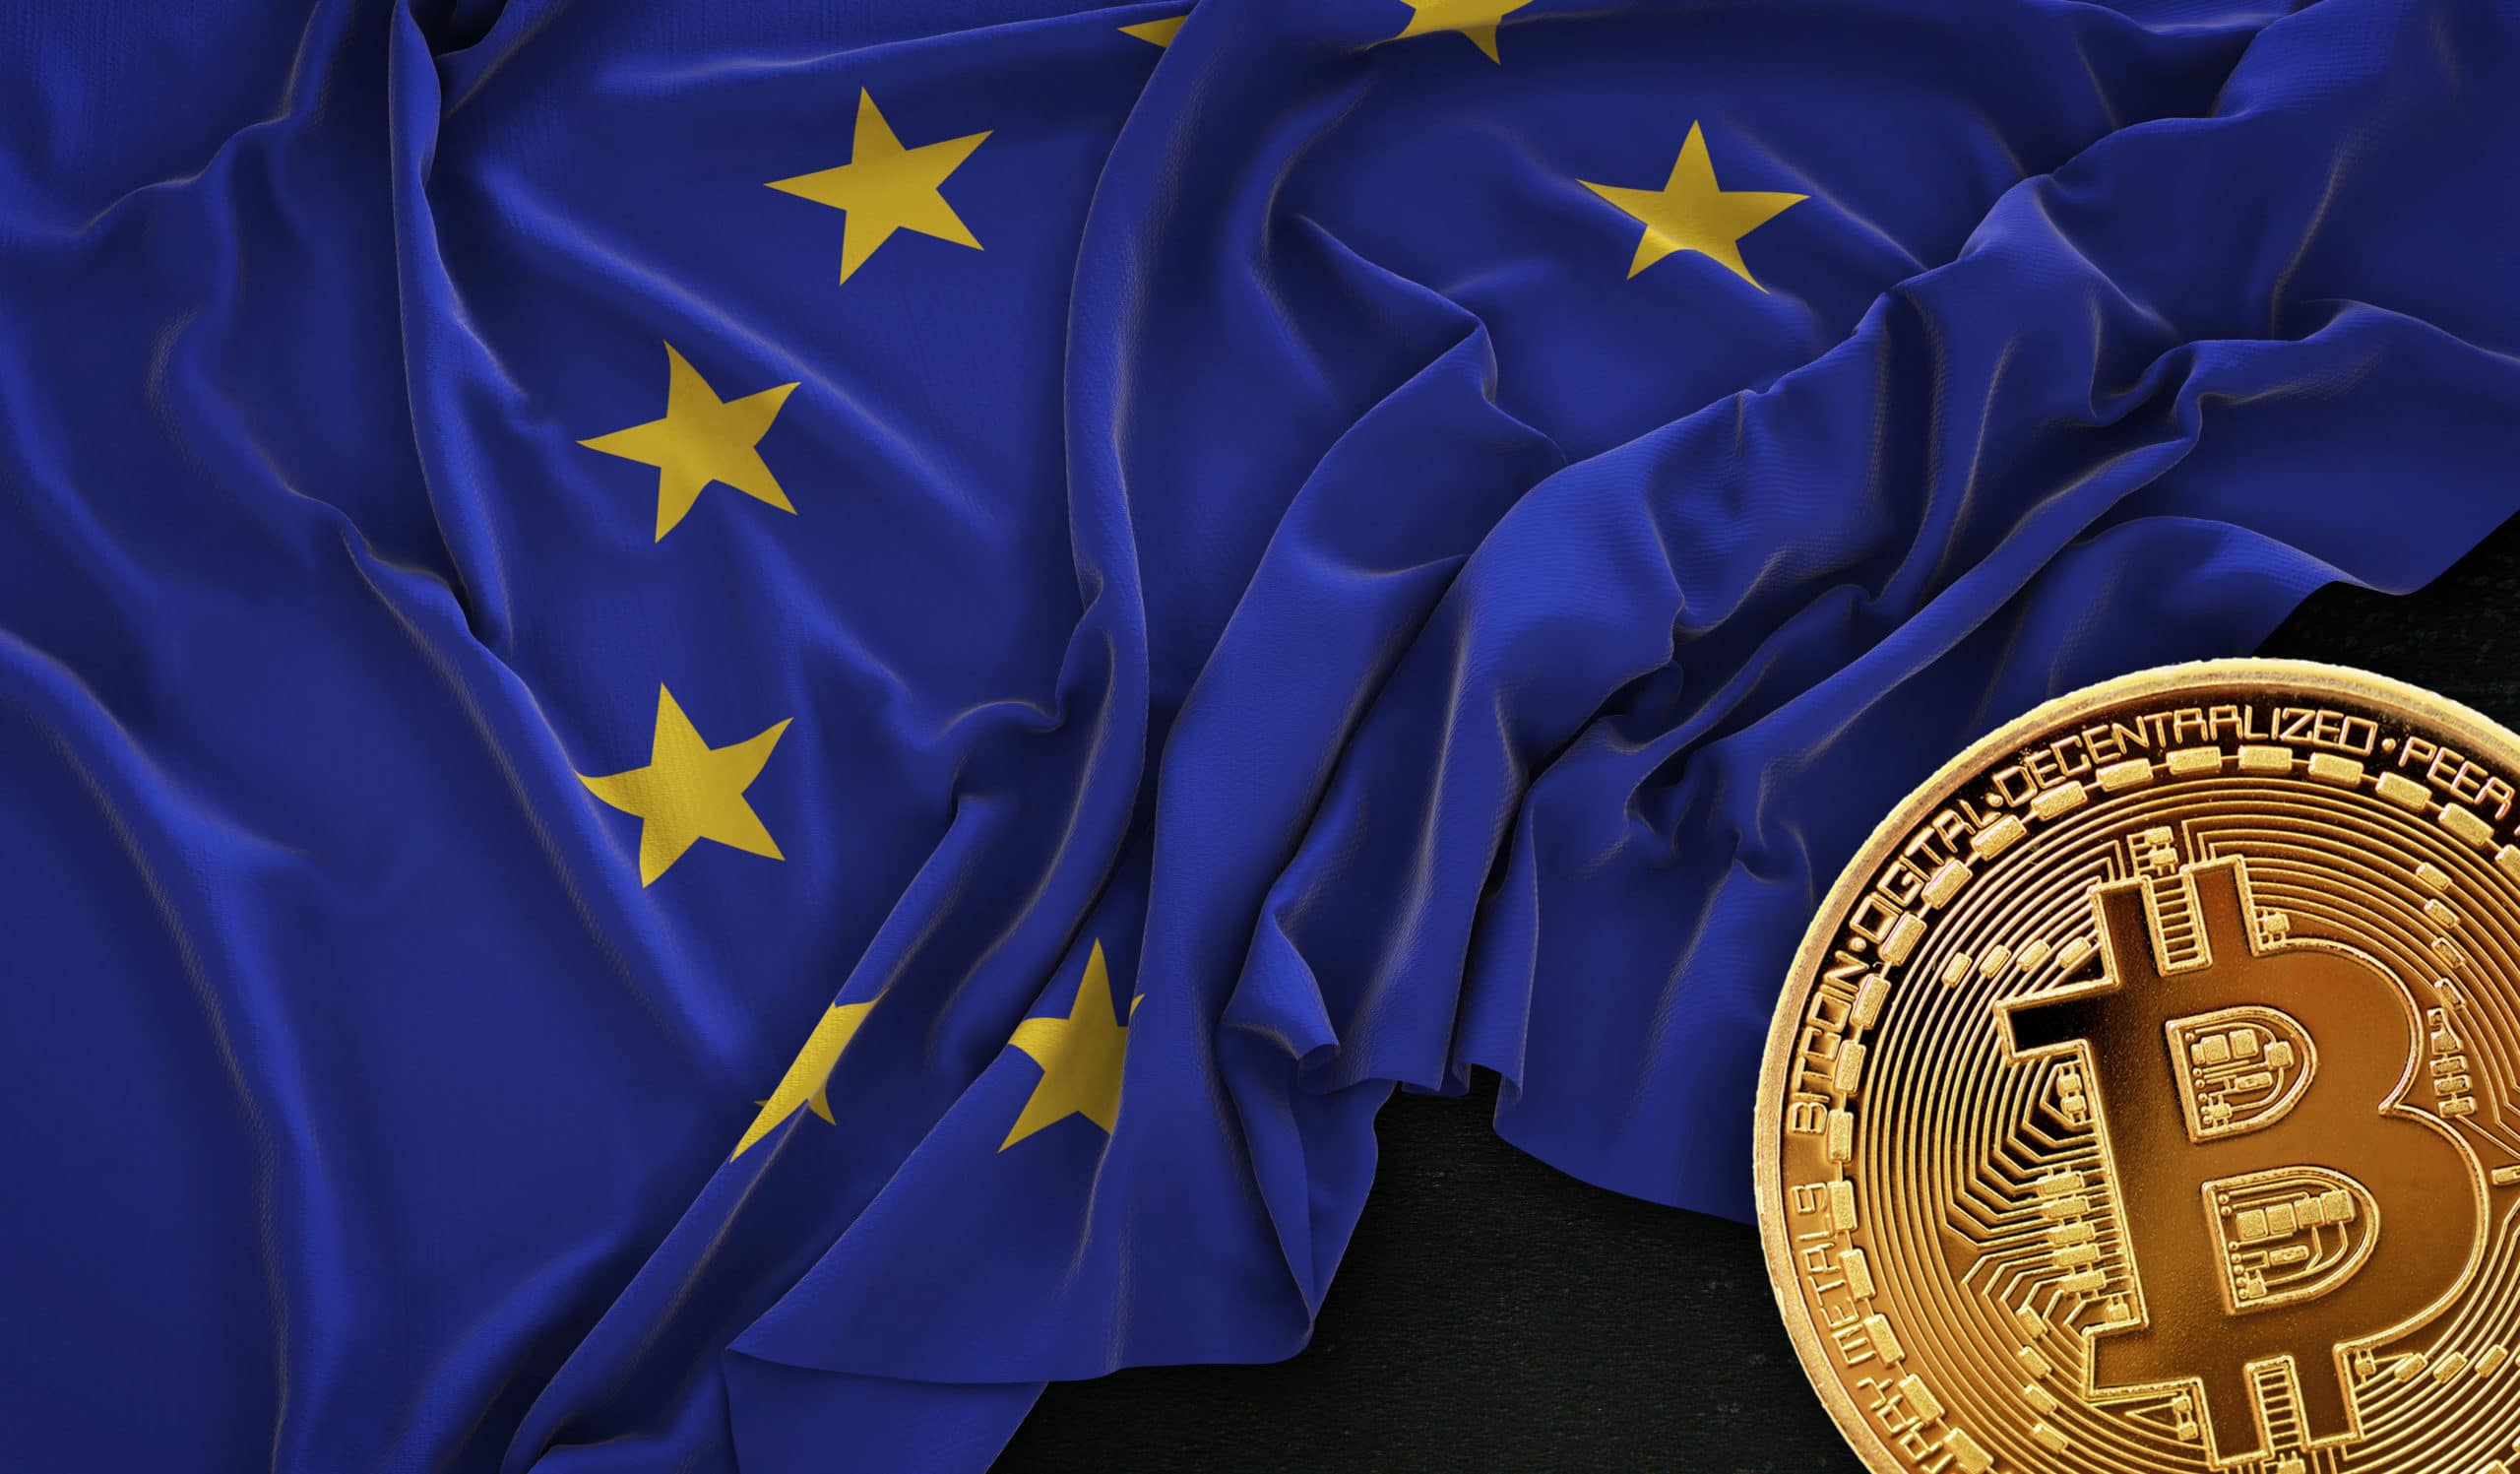 The EU will tighten regulation of cryptocurrencies.  Sending them will be significantly more difficult